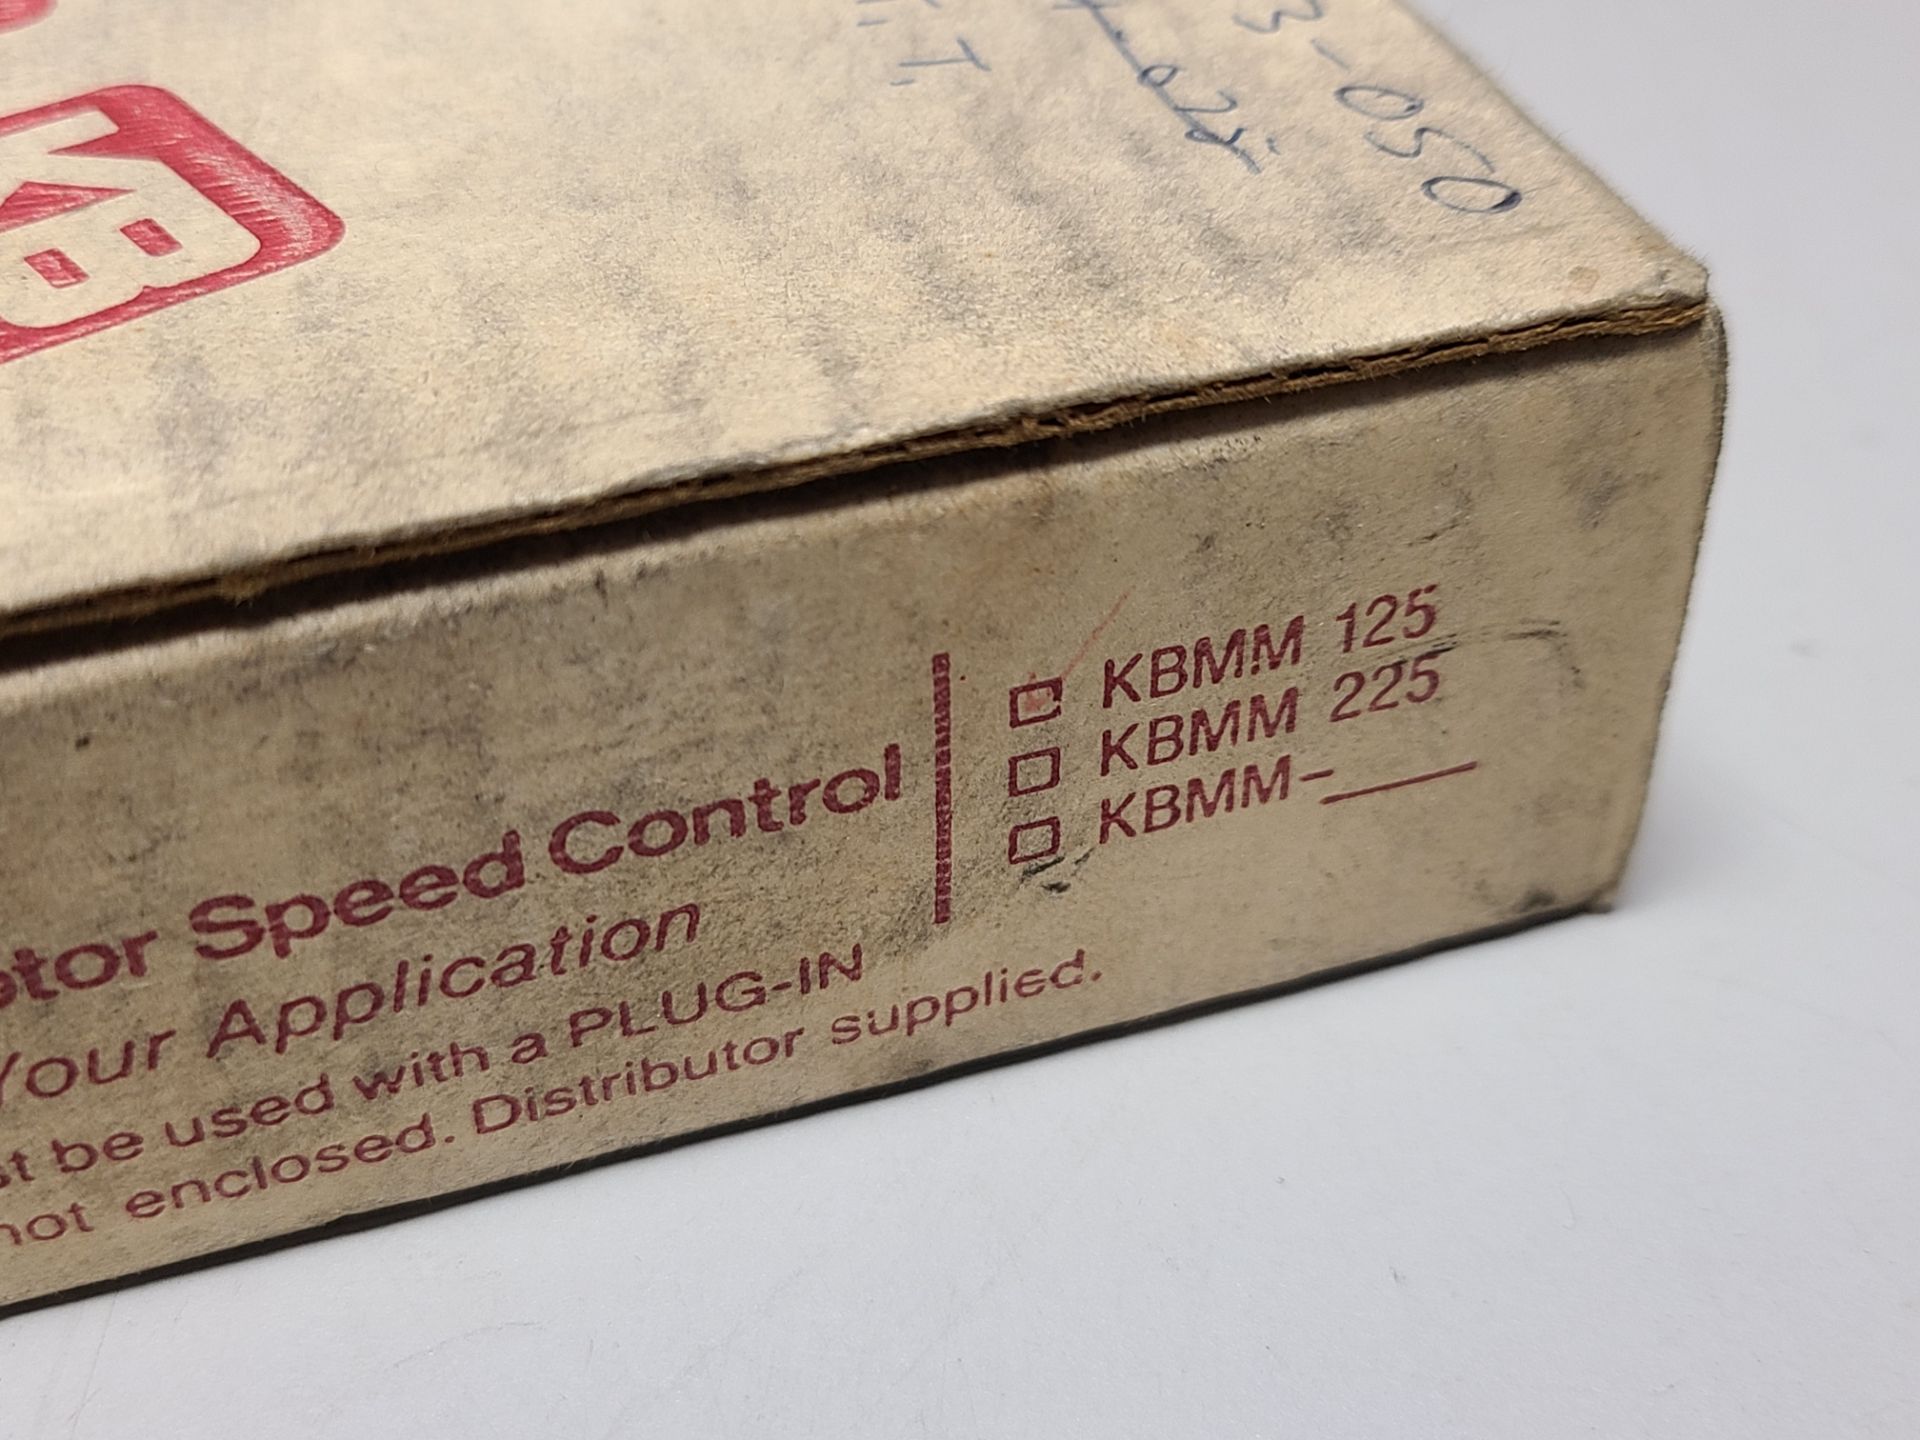 NEW KB DC MOTOR SPEED CONTROLLER - Image 2 of 3